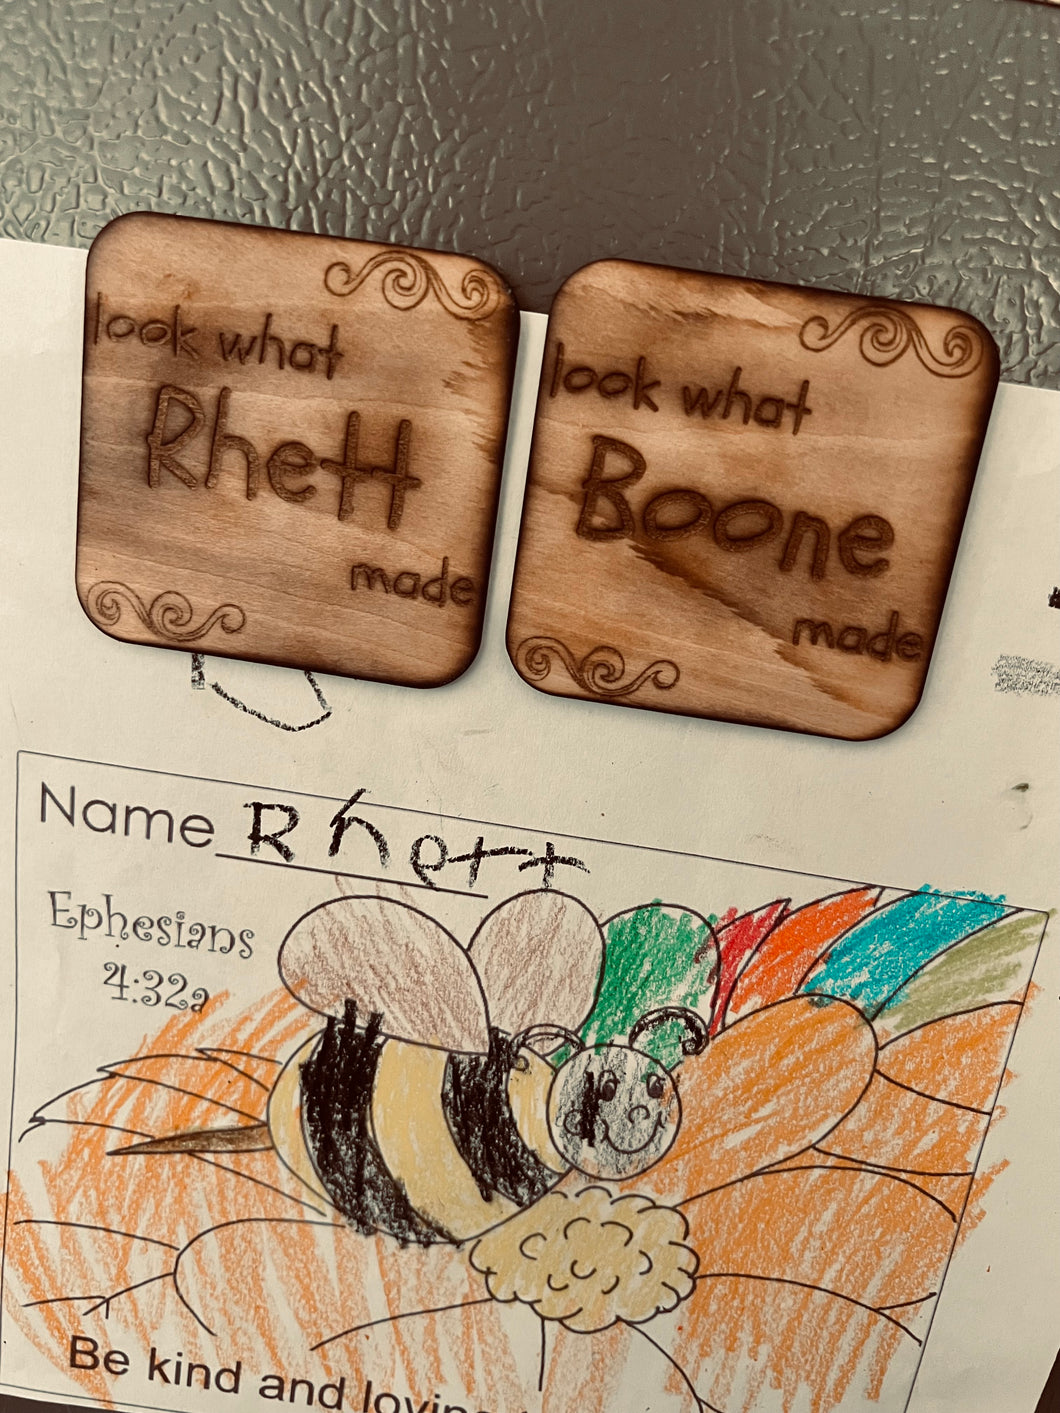 Look What ___ Made Refrigerator Magnets